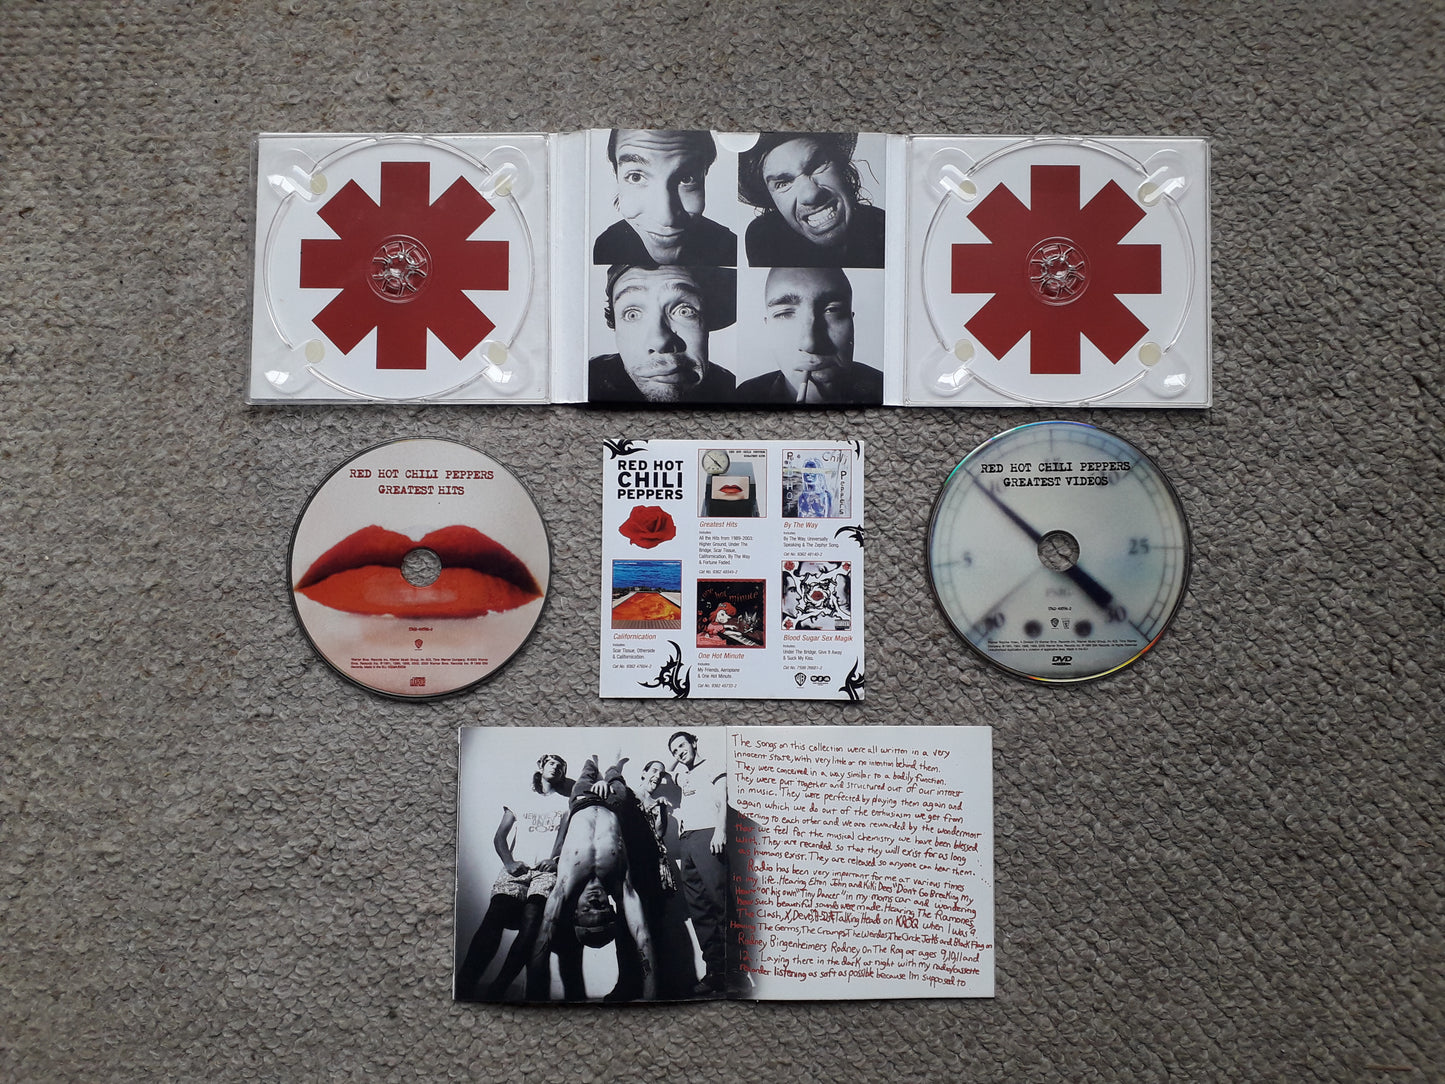 Red Hot Chili Peppers-Greatest Hits & Videos CD & DVD (9362 48596-2)